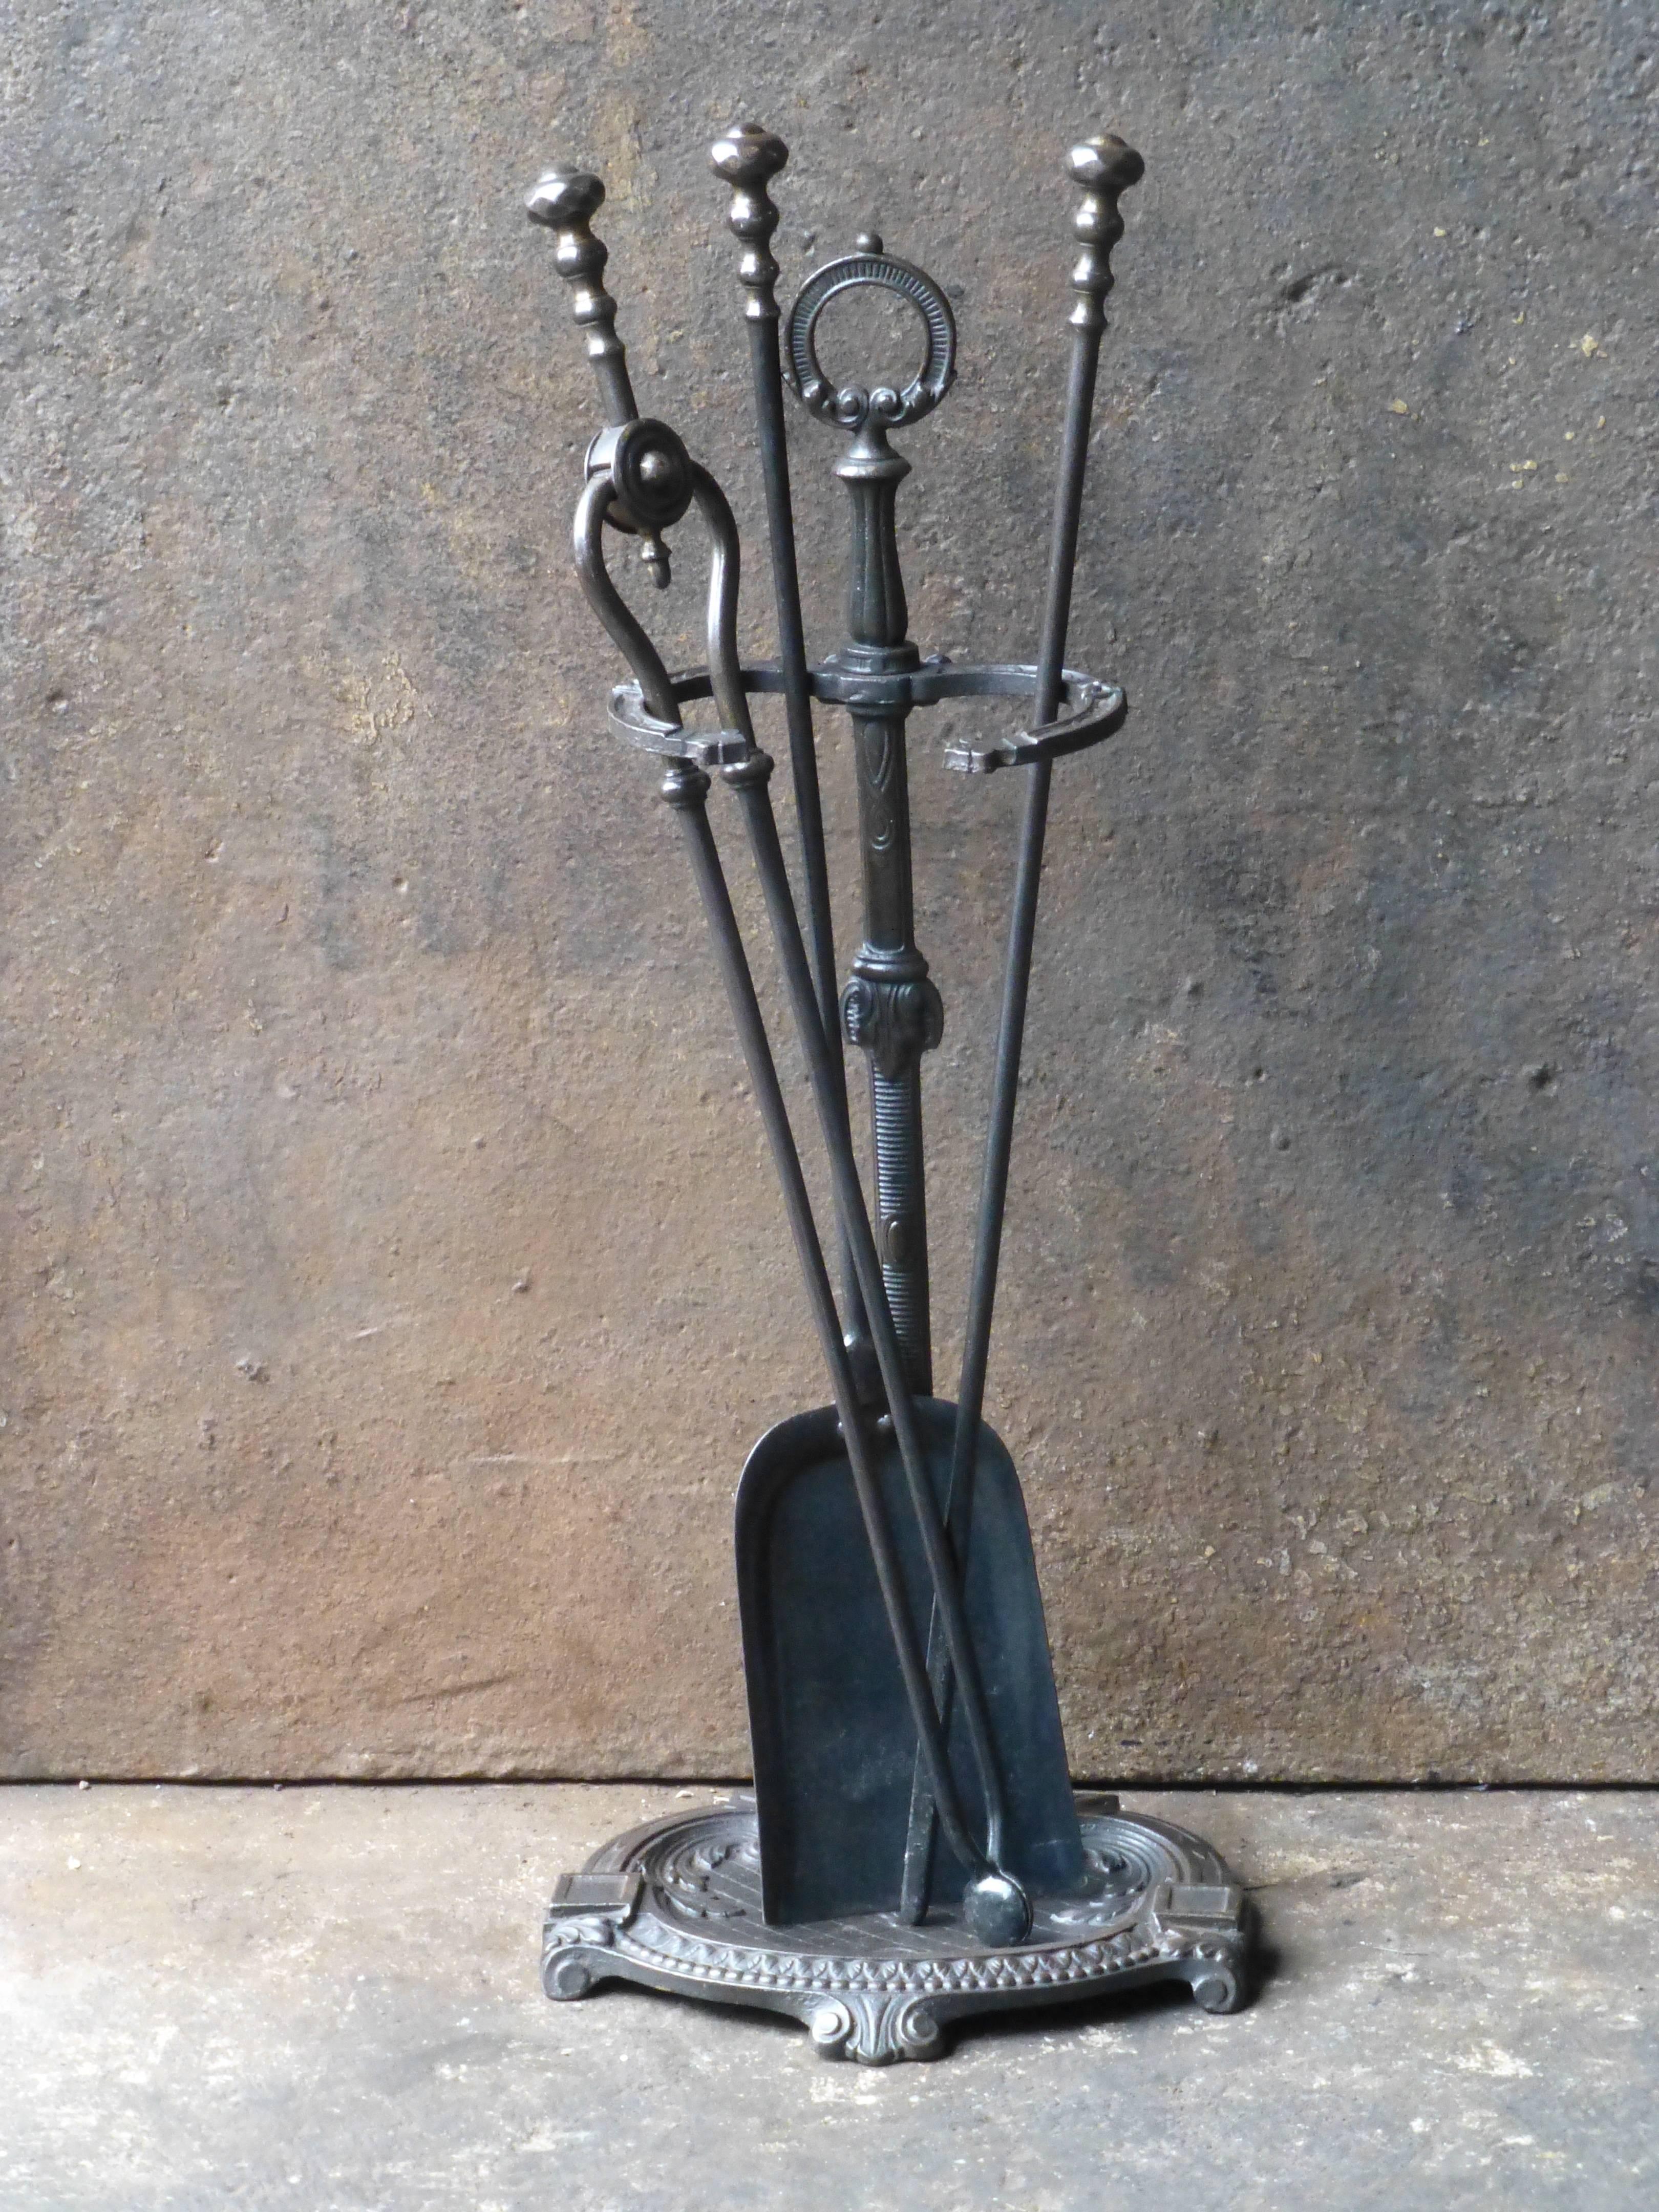 19th century English fireplace tool set. Fire tools made of wrought iron (tools) and cast iron (stand).